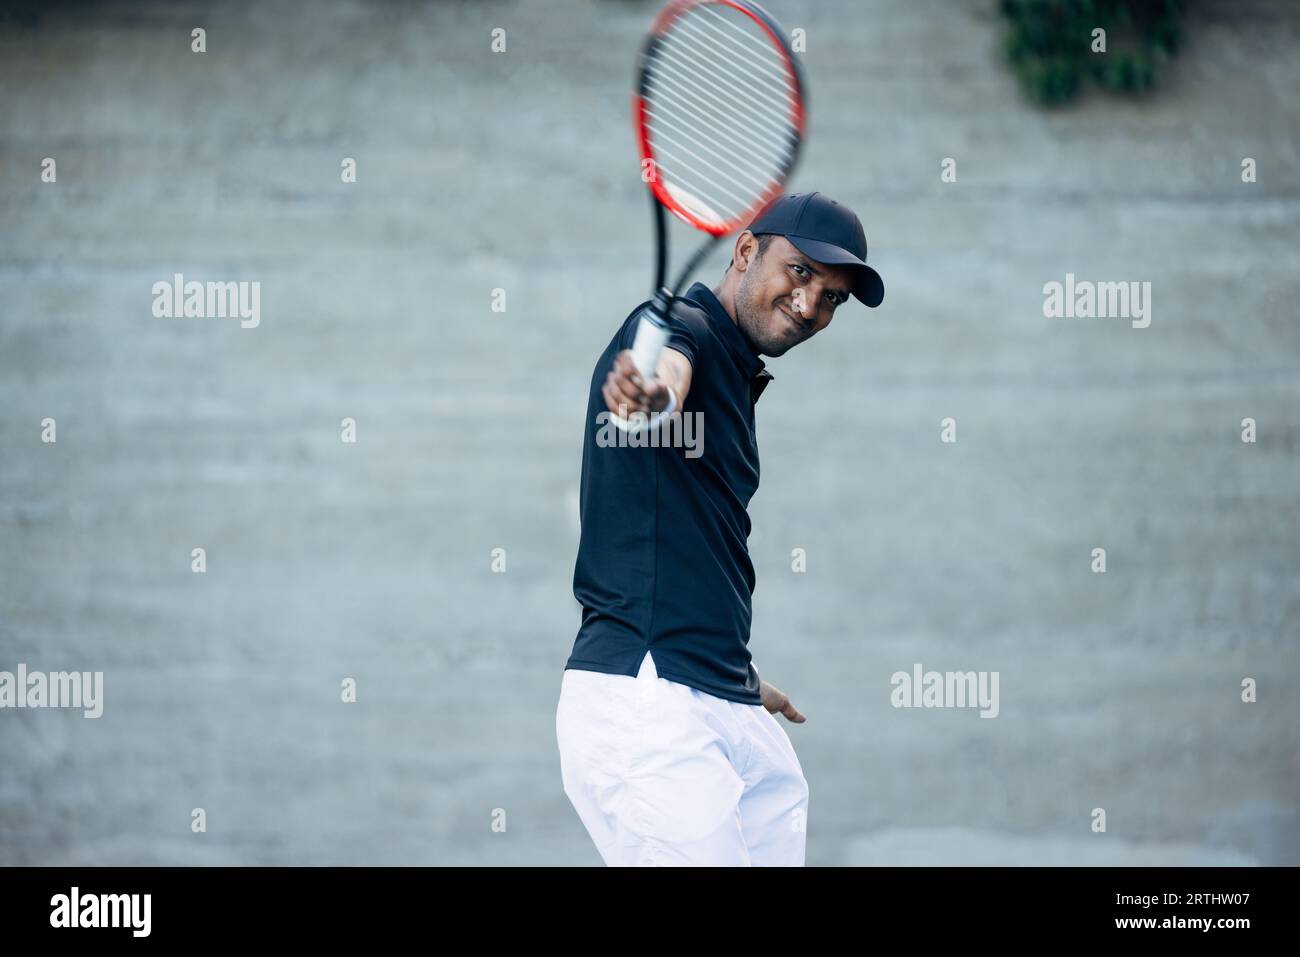 Young tennis player playing on a hard court and hitting a ball during a match Stock Photo